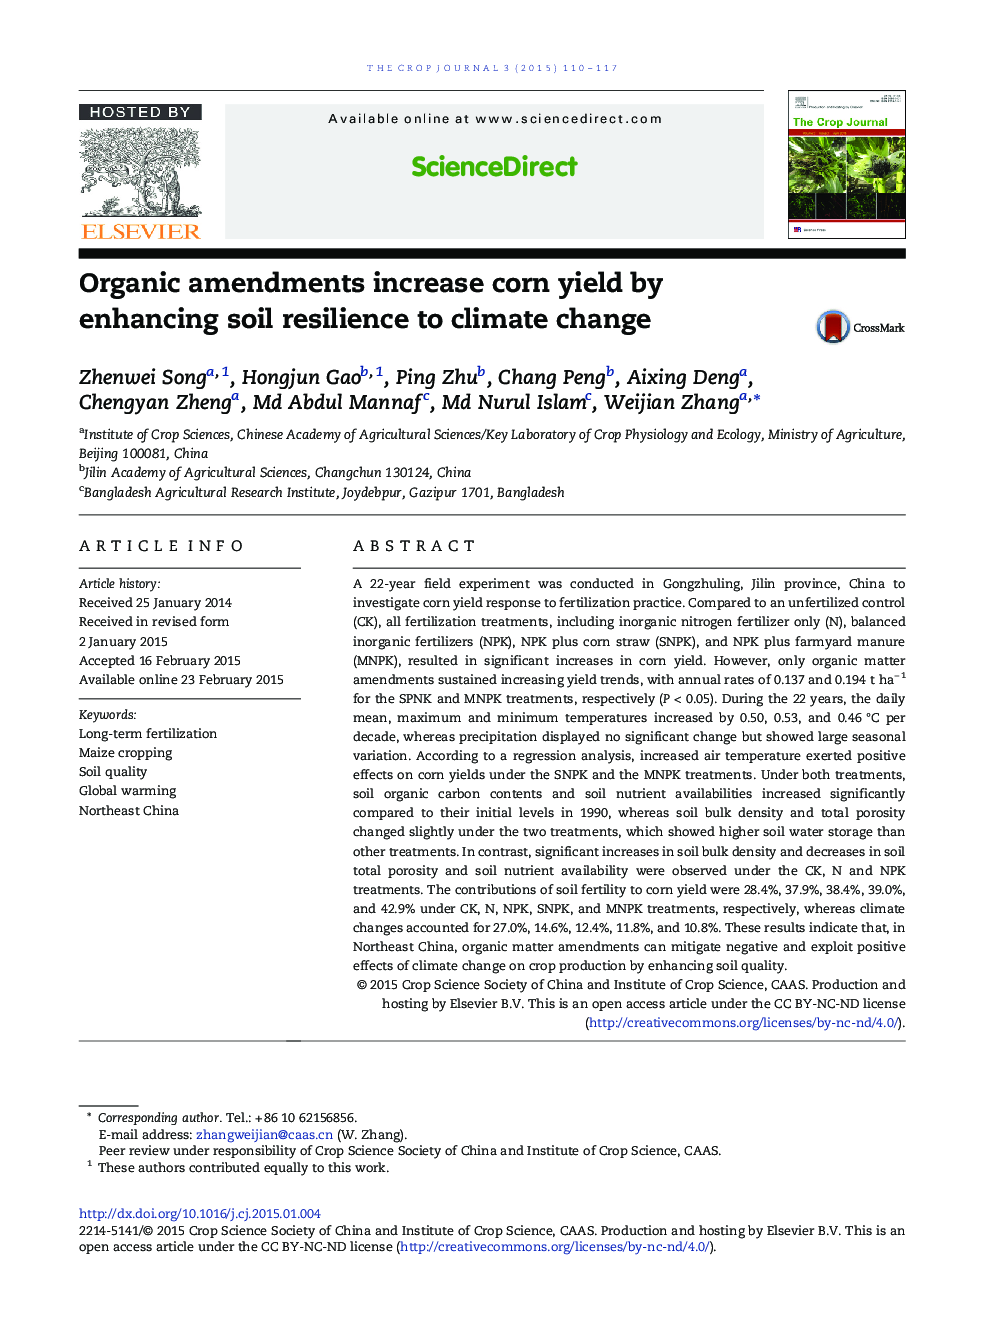 Organic amendments increase corn yield by enhancing soil resilience to climate change